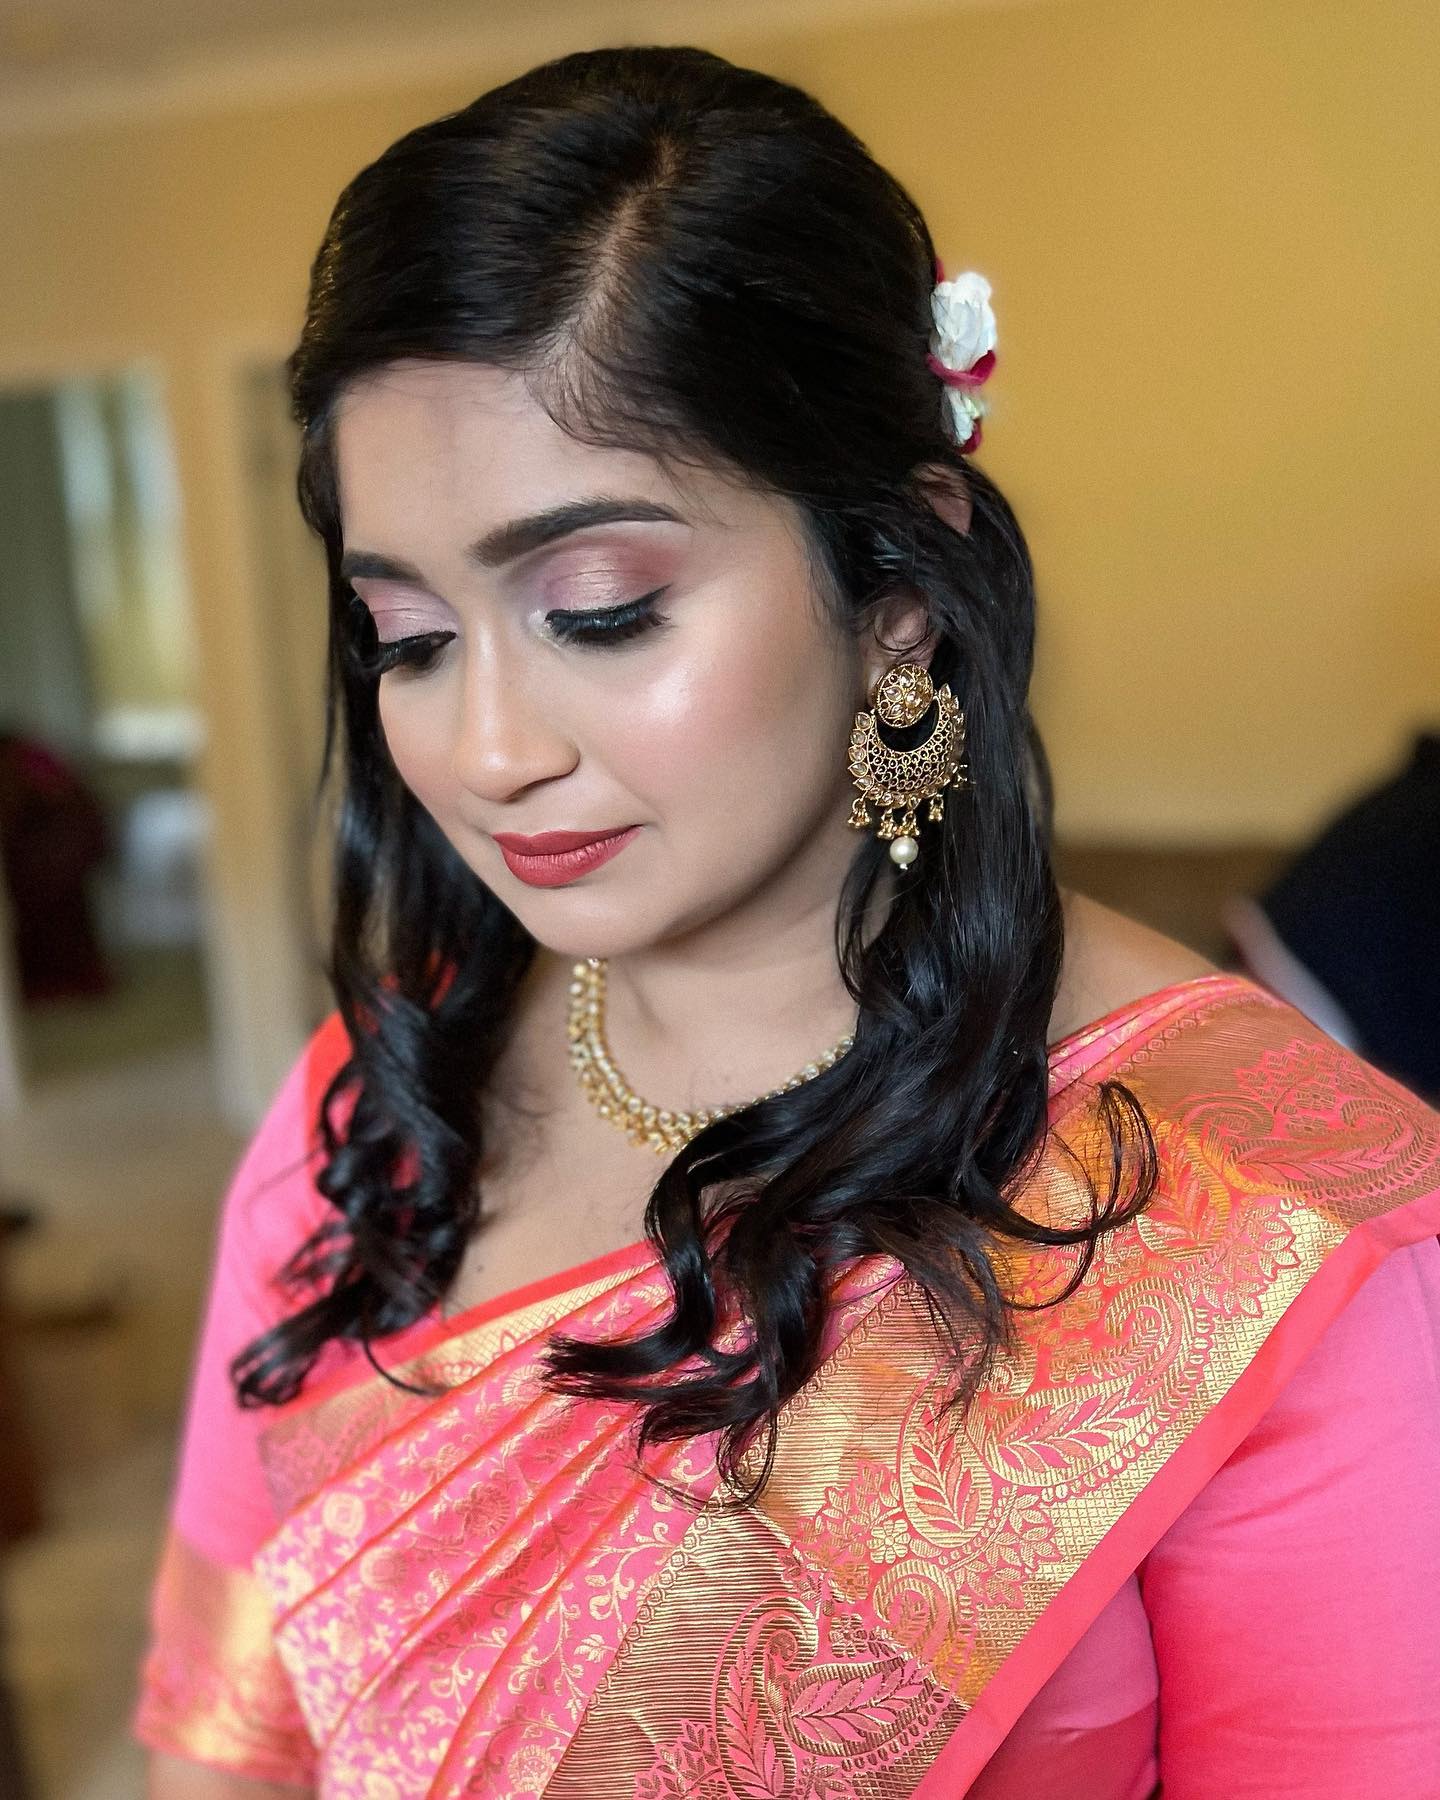 Throw🔙 Tuesday… going through photos of looks I’ve created in recent months/weeks for some gorgeous ladies! 💖

———————————————————————————
❗️Taking all 2022/2023 bridal and 2022 non-bridal bookings! Secure a booking for your next event via the link in my bio.
———————————————————————————
❗️1:1 Personal Makeup Lessons Now Available. Enquire via the website in bio for more information.
———————————————————————————
#makeupartistsydney  #sydneymakeupartist #sydneymakeupartists  #100wattskin #glowyskin #maccosmetics #brideoftheday #glammakeup #indiandesigners  #weddingmakeup #fullglam 
 #wedding #maccosmetics #glowingbride #dewyskin #indianwedding #toptags #motd #glameyes #ootd #photoshoot #instafashion #naturalglam #makeup  #indianbride #partymakeup #specialoccasionmakeup